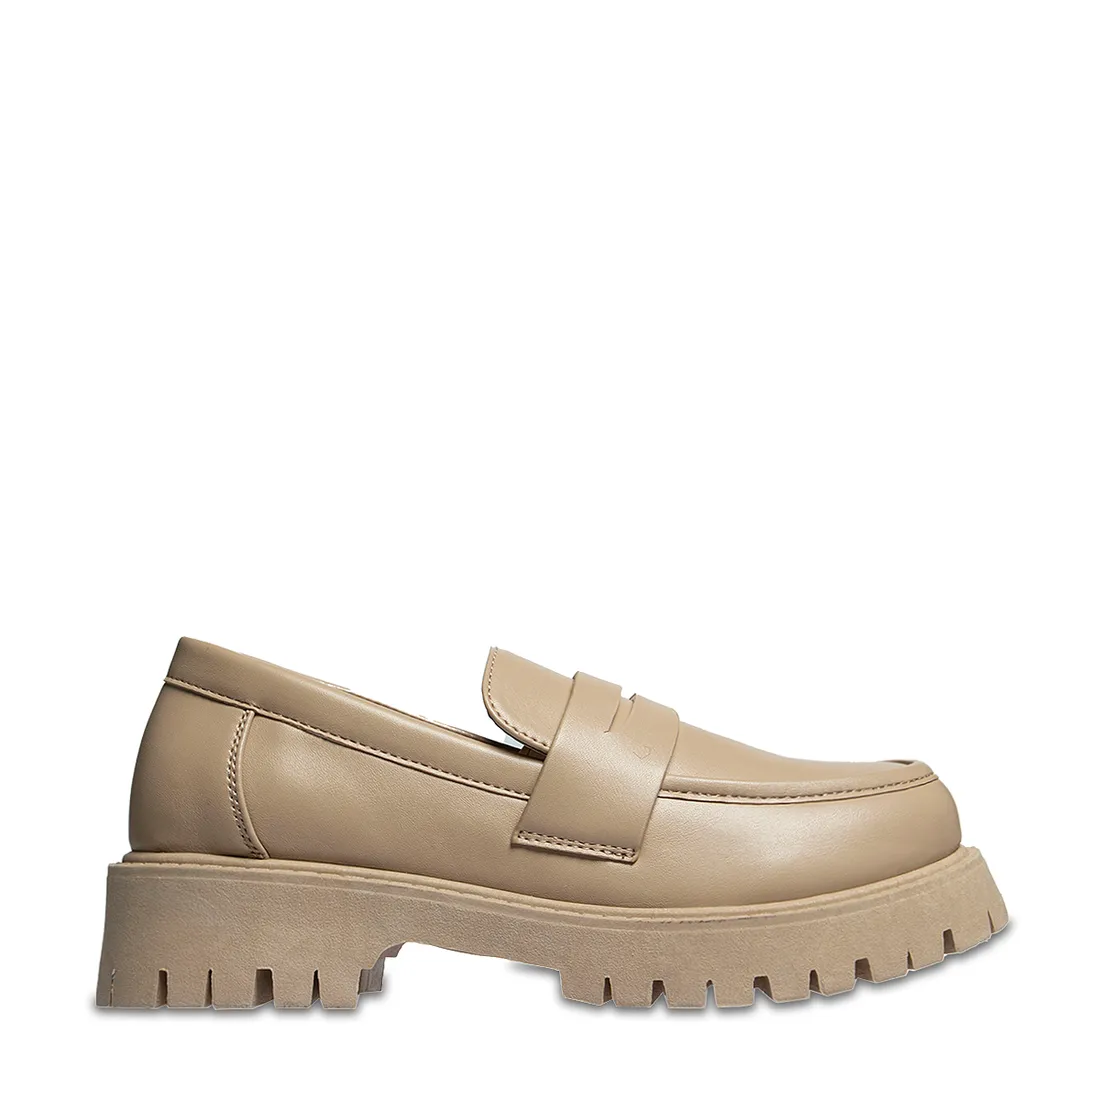 Chunky loafer stone - GIRLS 7-15 YEARS Shoes | Ackermans